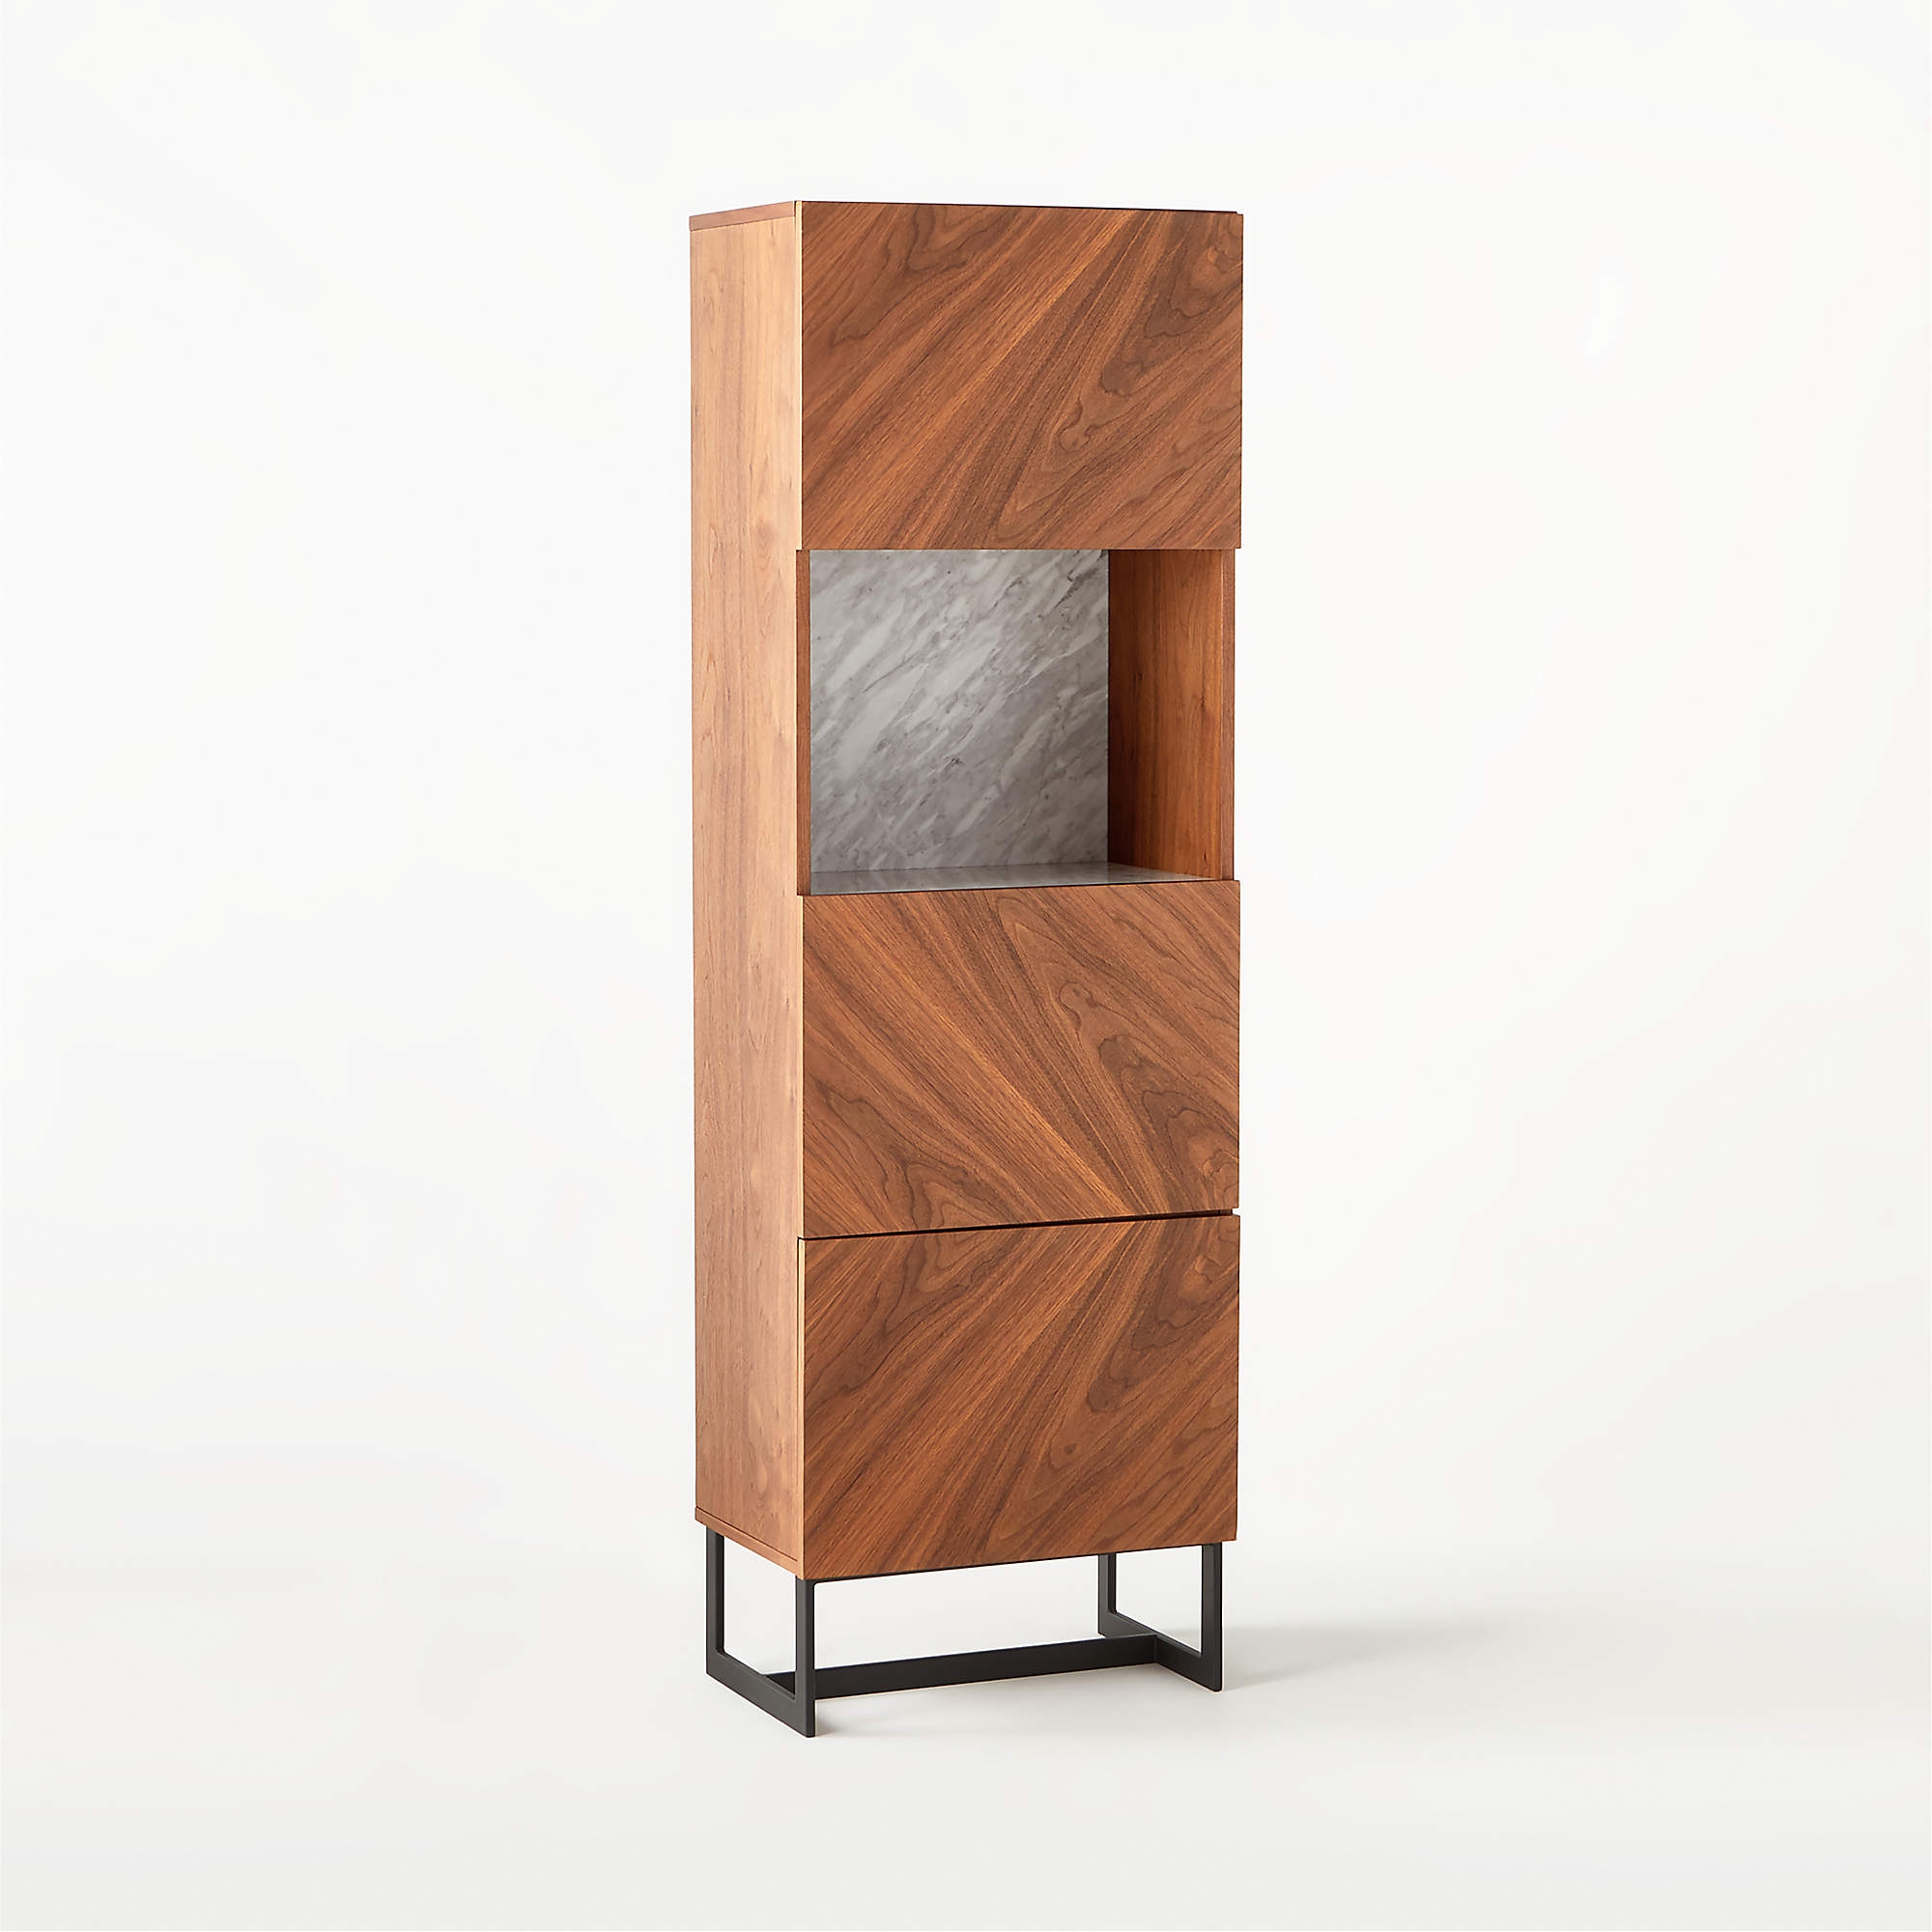 Suspend Tall Bar Cabinet, White Marble & Walnut - Image 1